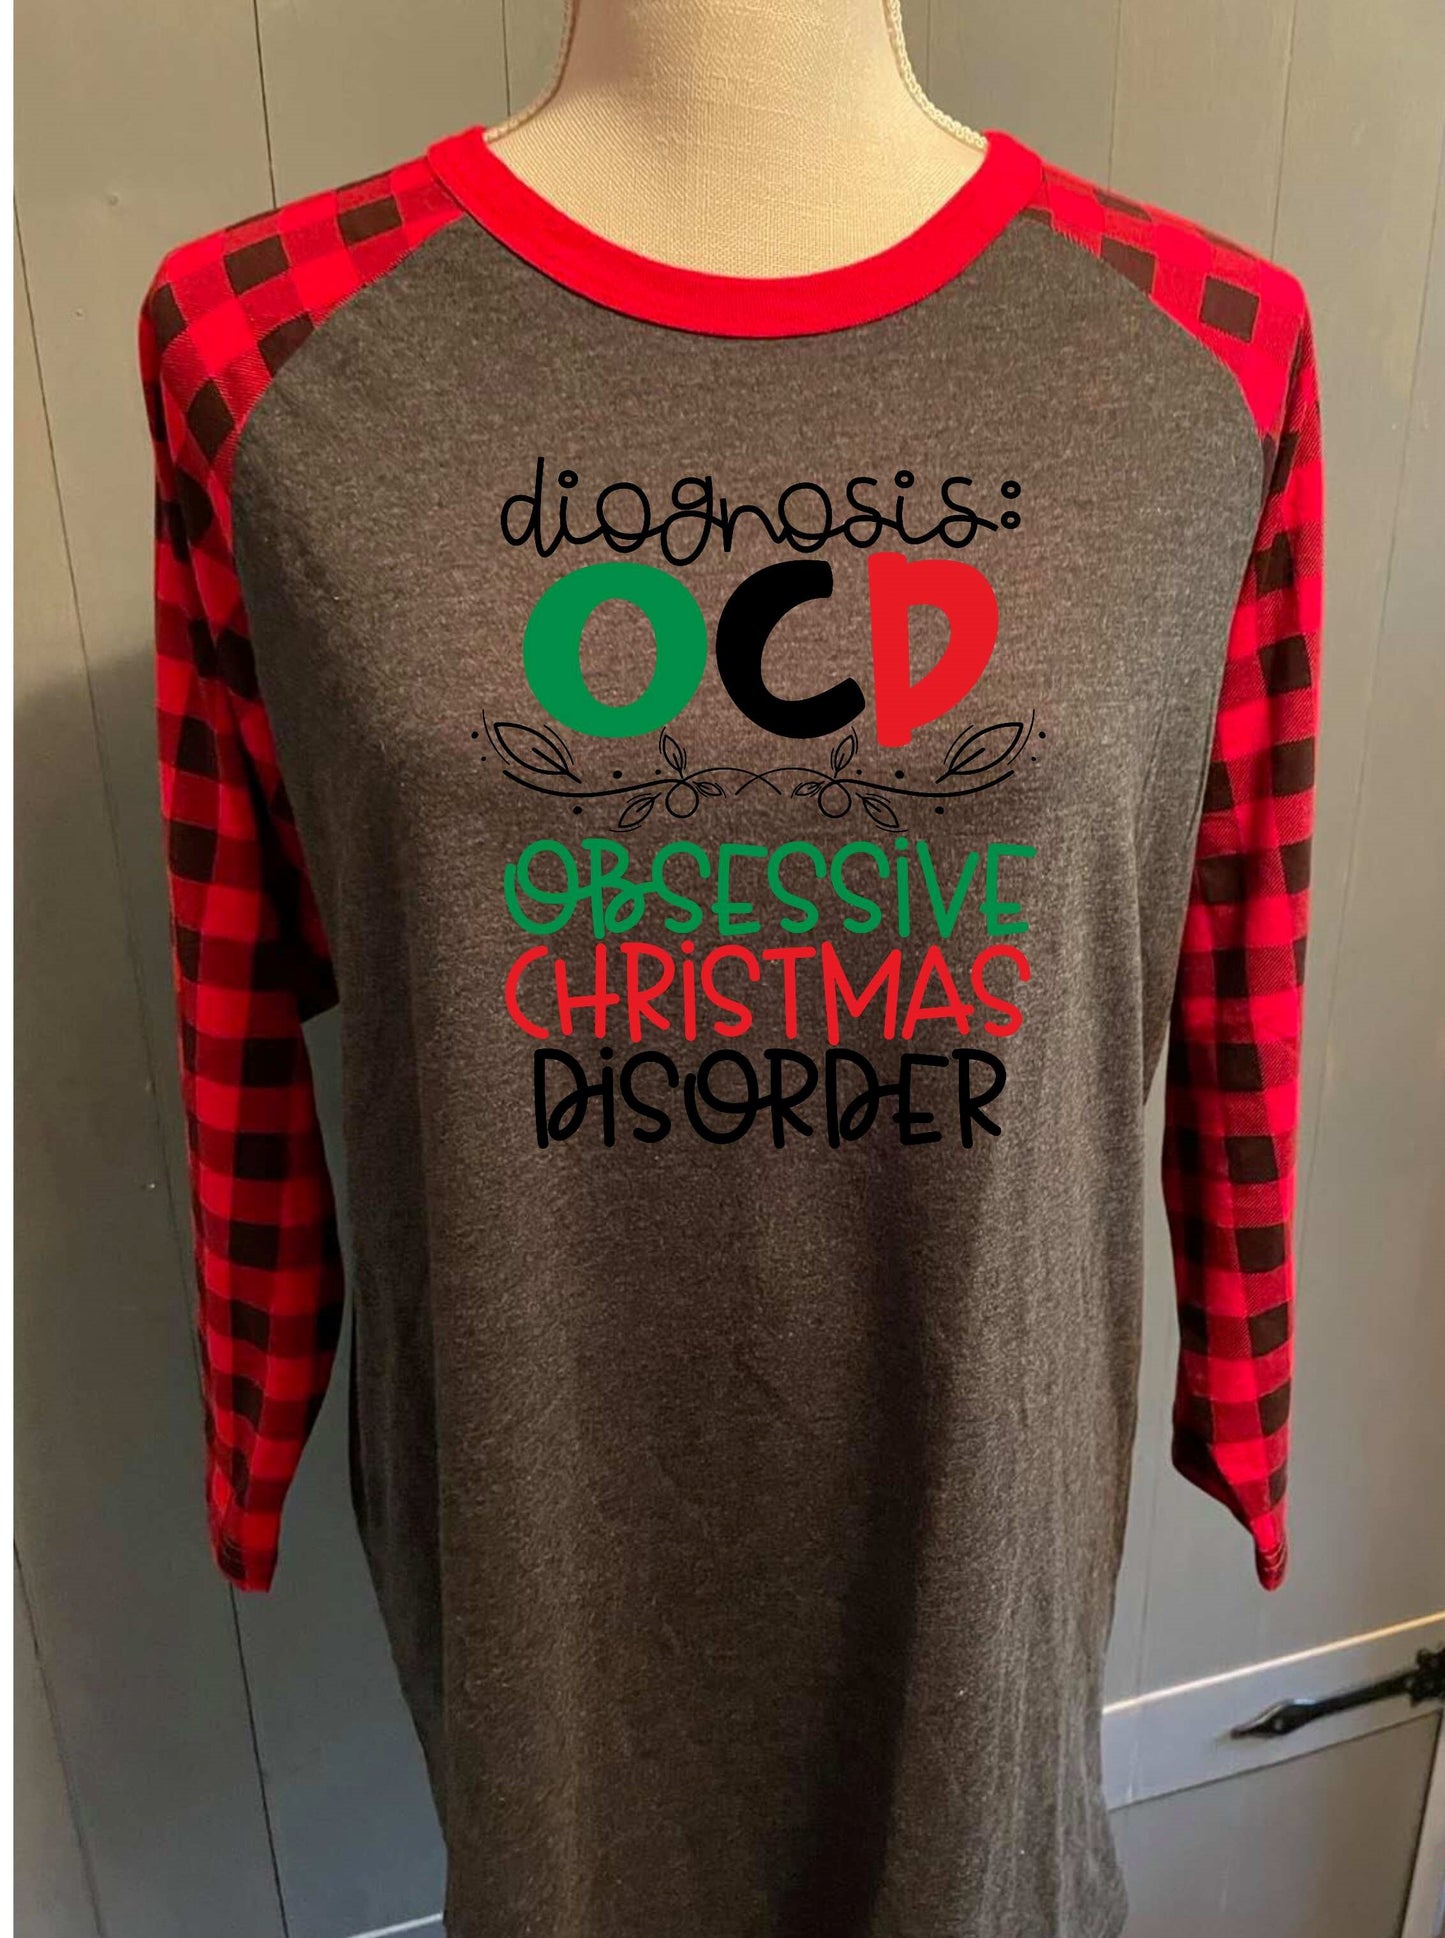 Diagnosed with OCD T-shirt